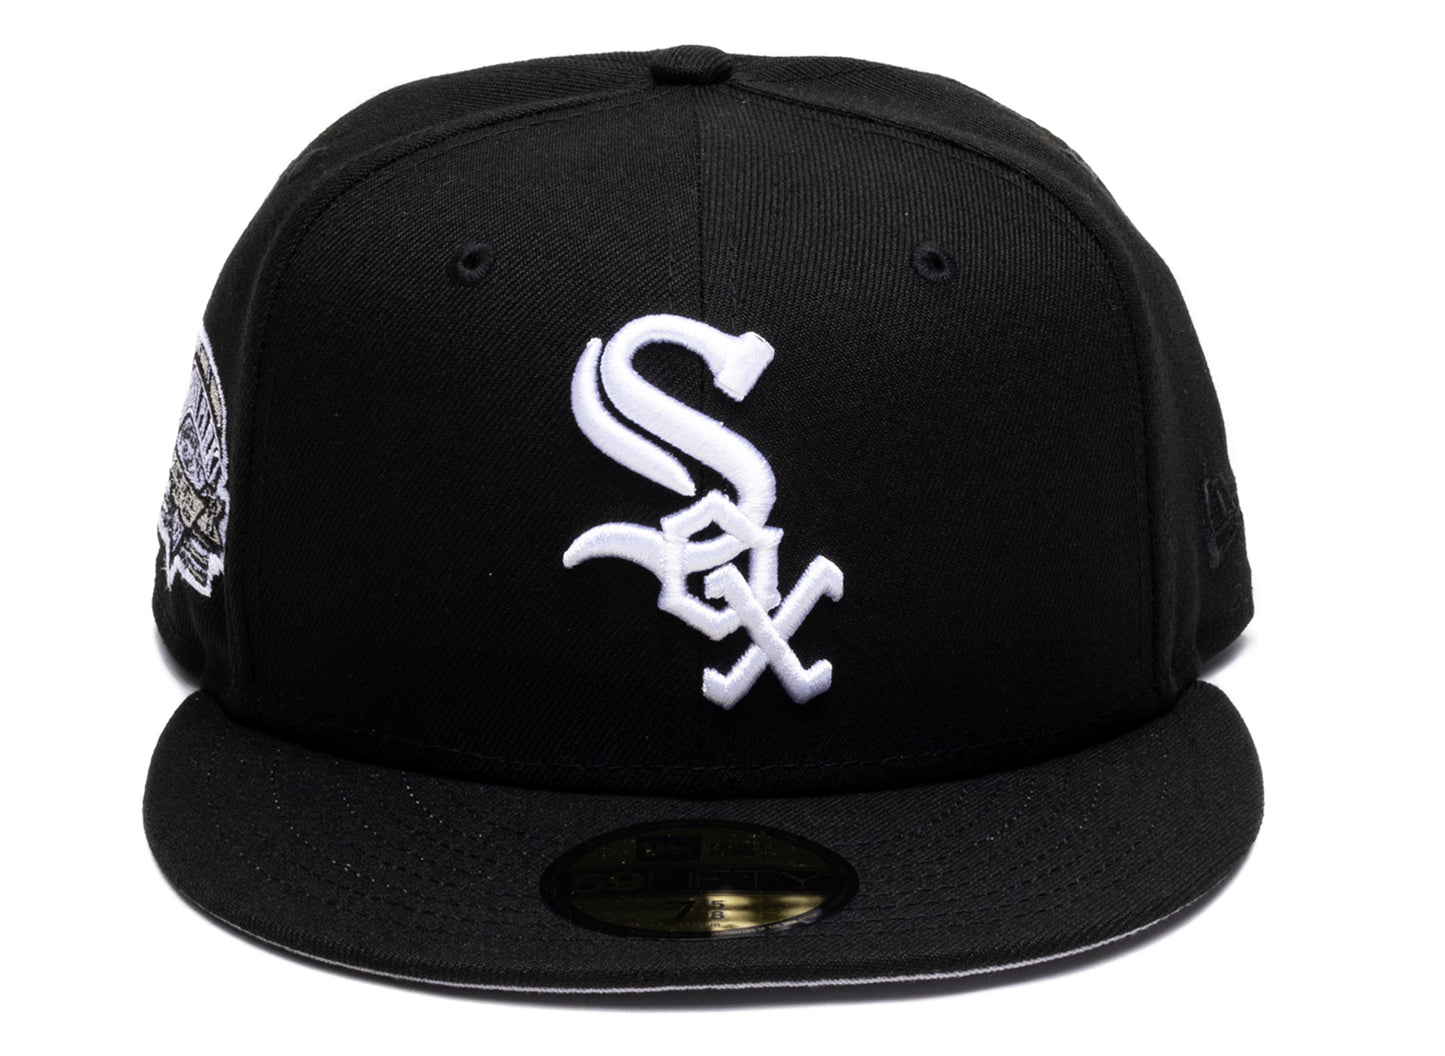 New Era Chicago White Sox Inaugural Year 5950 Fitted Hat